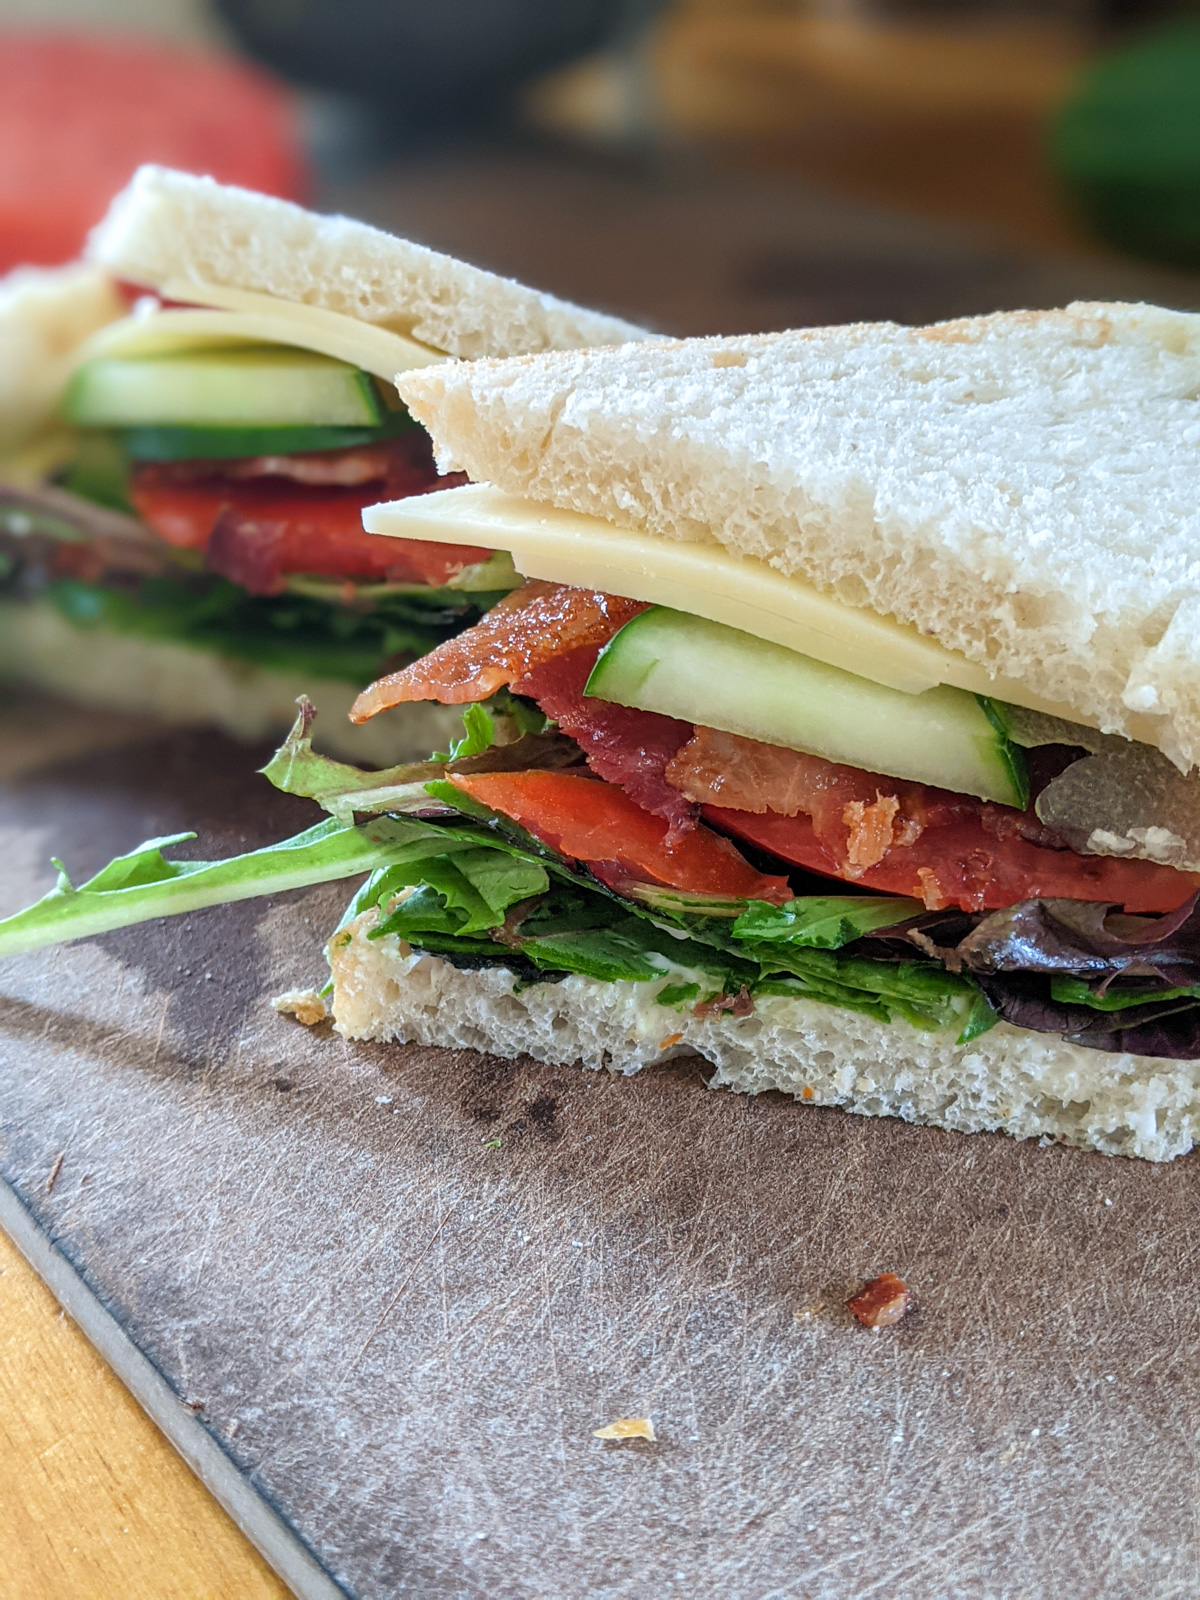 A BLT sandwich on white bread with cucumber and avocado.